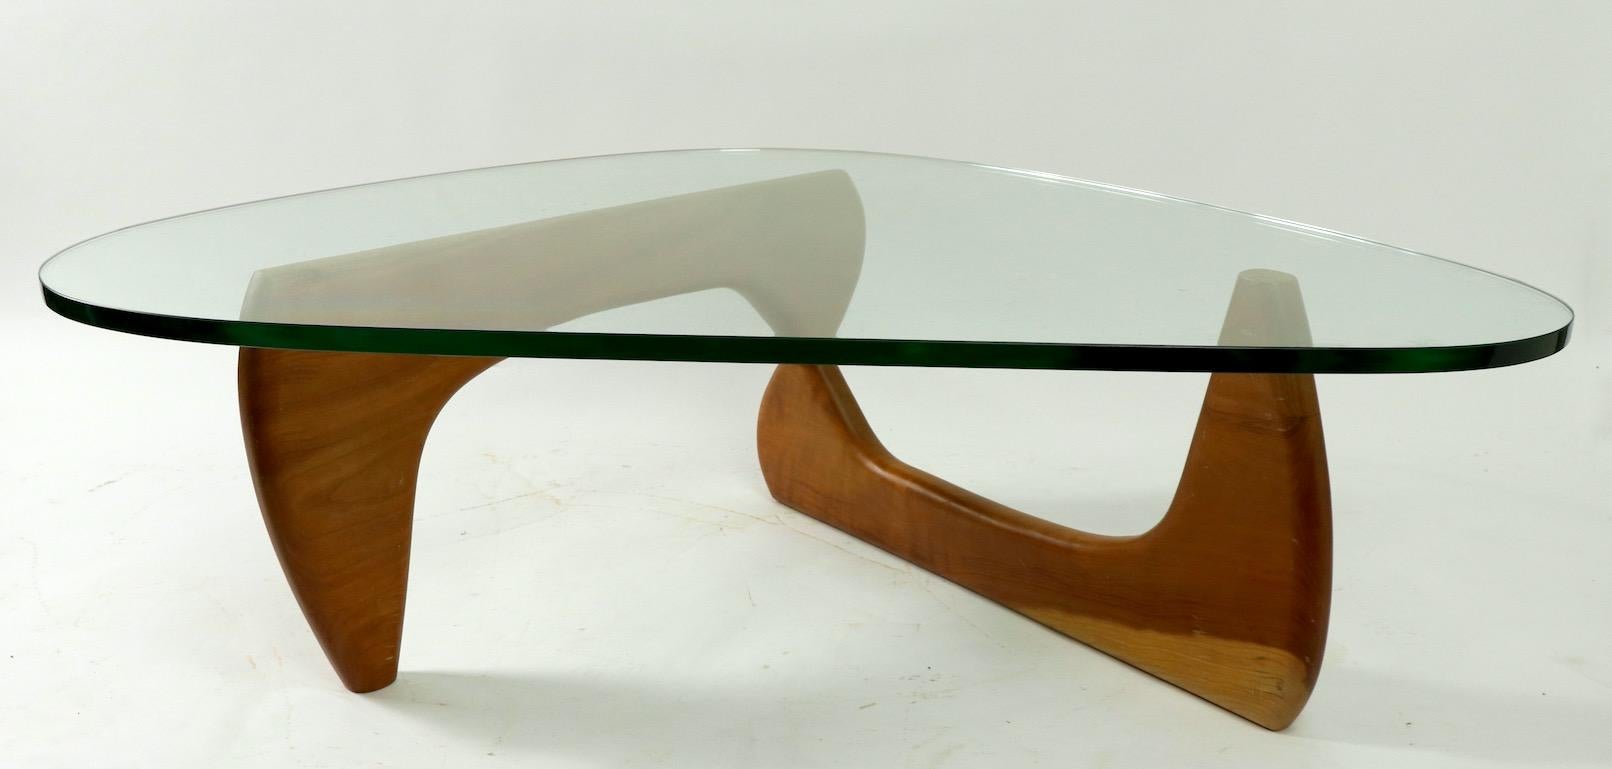 Arguably the most iconic piece of Mid-Century Modern design furniture ever produced, the definition of a Classic, the Noguchi freeform coffee table, this example is in very good original condition, showing some light scratching to the top surface,